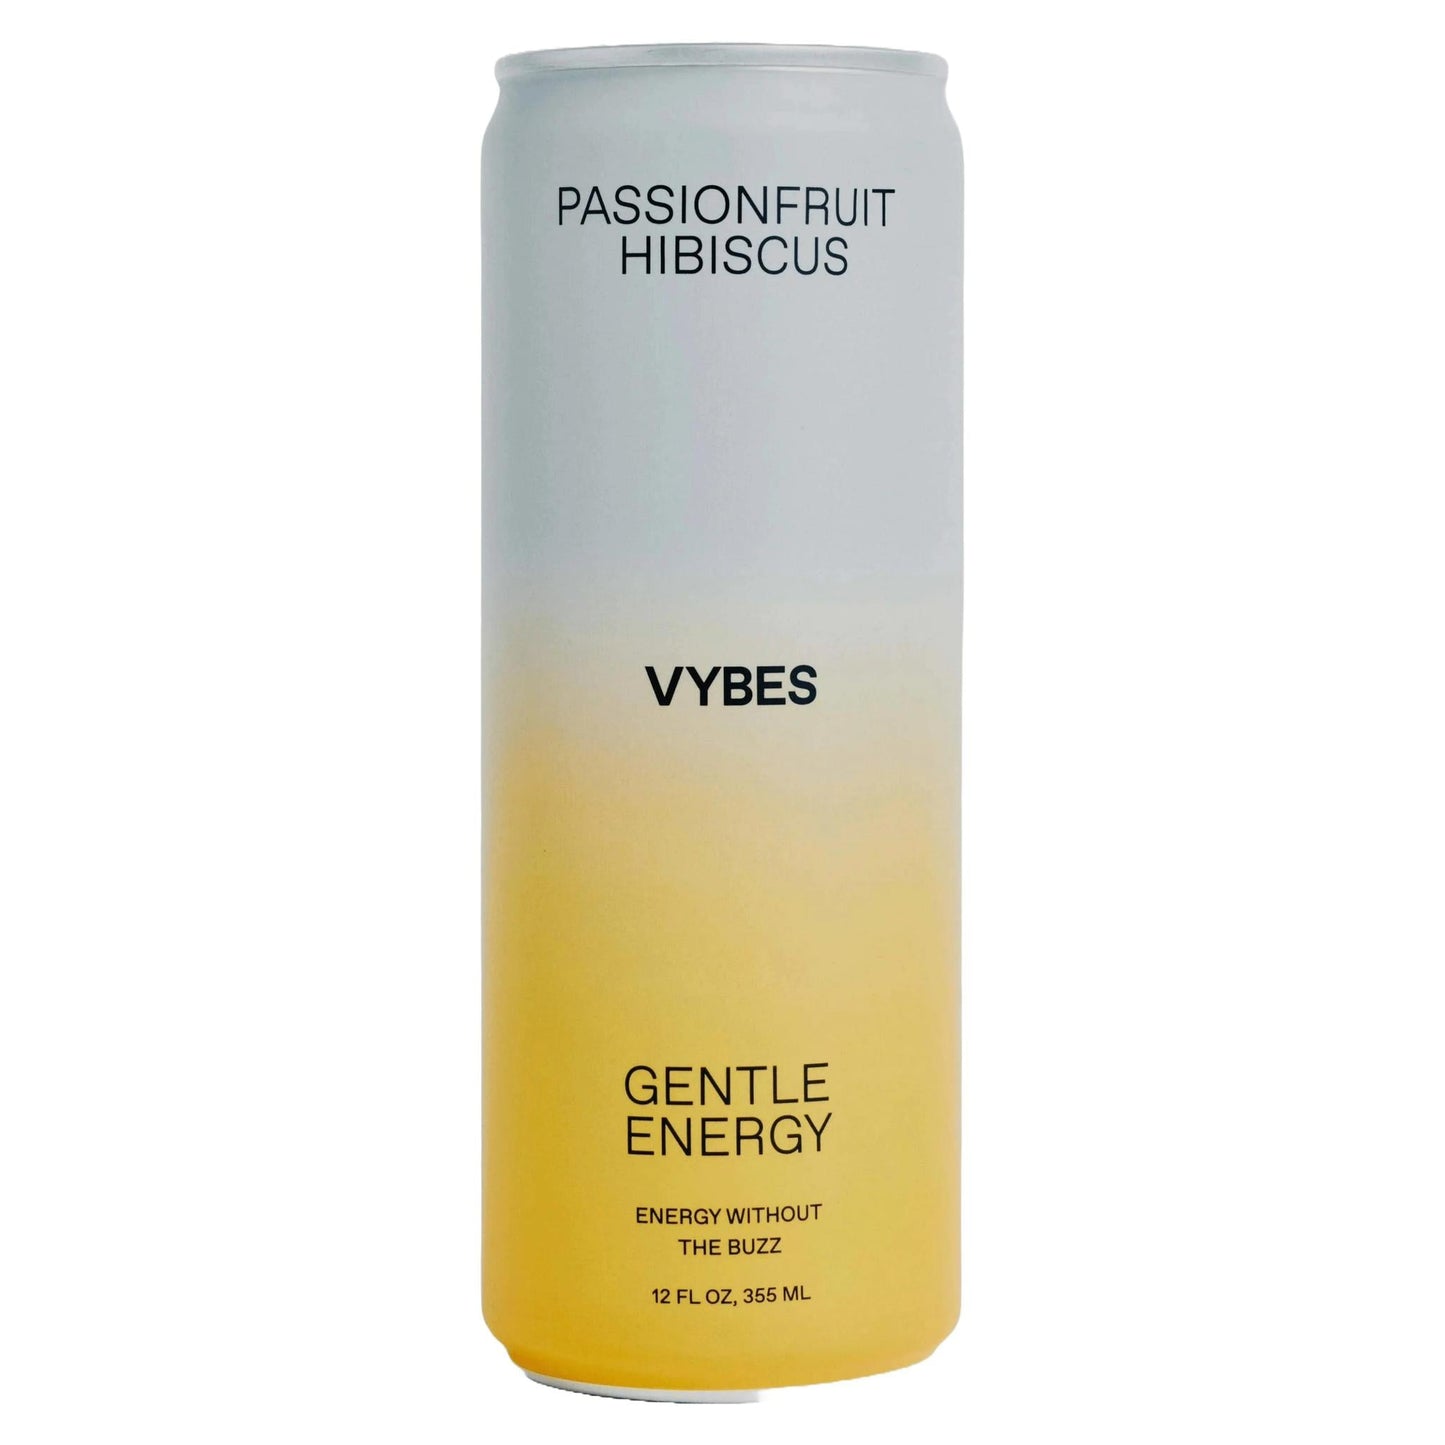 VYBES - 'Passionfruit Hibiscus' CBD-Infused Beverage (14OZ) - The Epicurean Trader